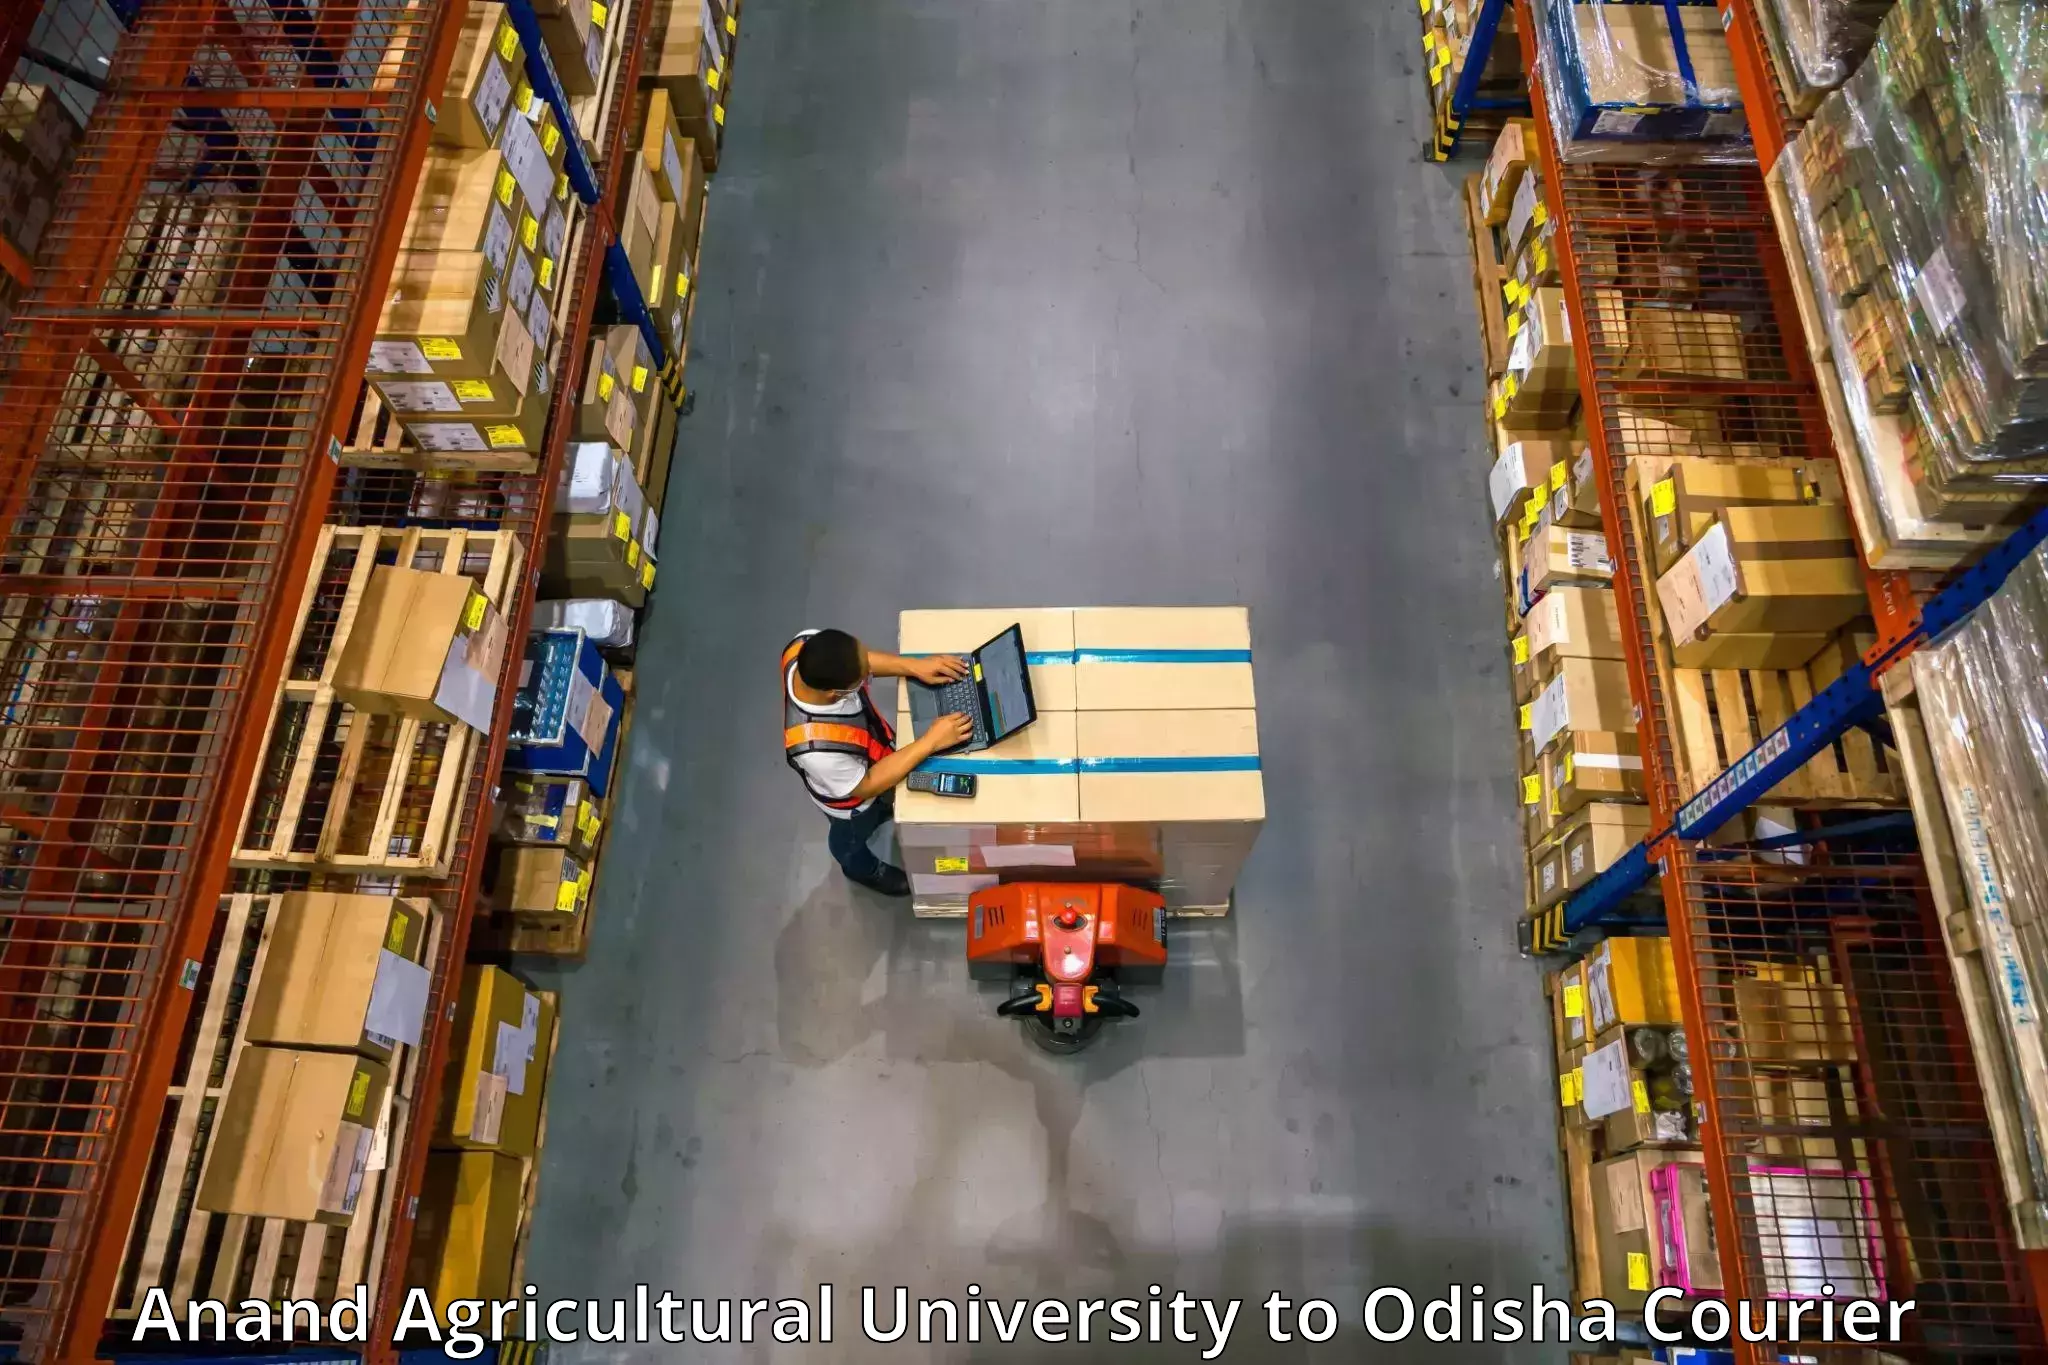 Furniture transport specialists Anand Agricultural University to Bhuban